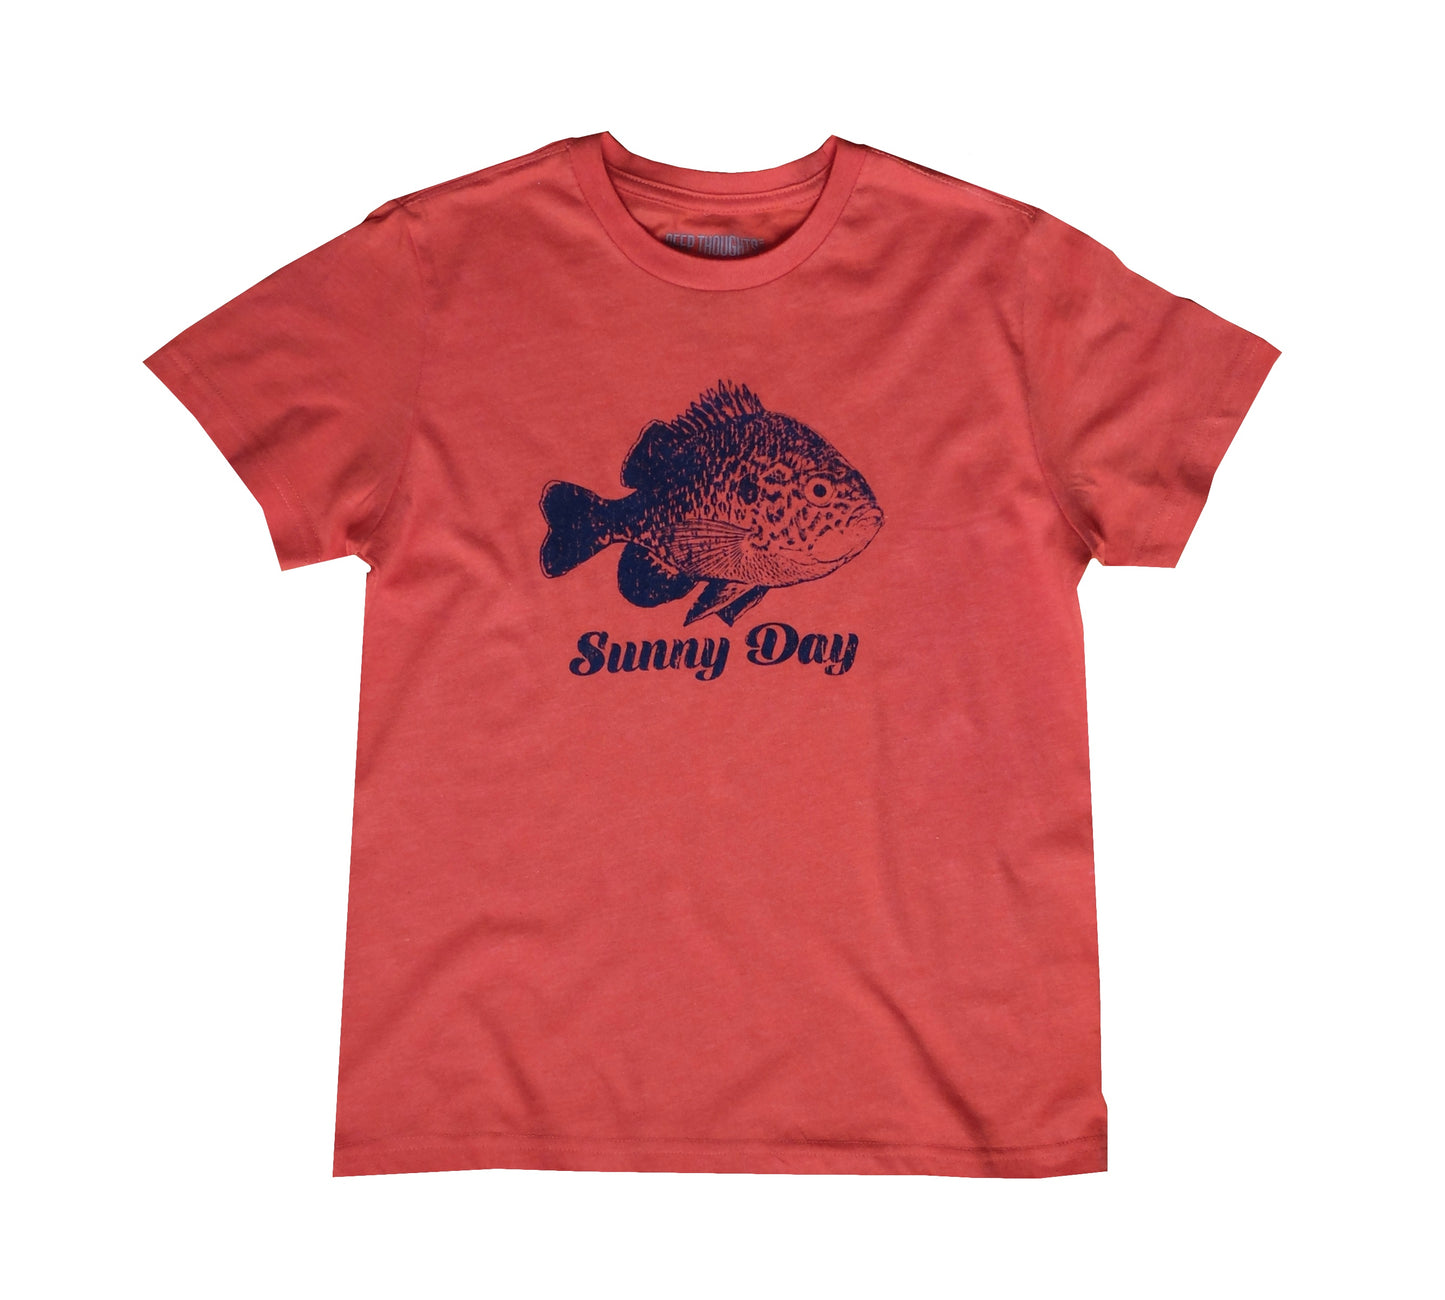 bright heather orange youth t-shirt with navy blue bluegill fish graphic and 'sunny day' text